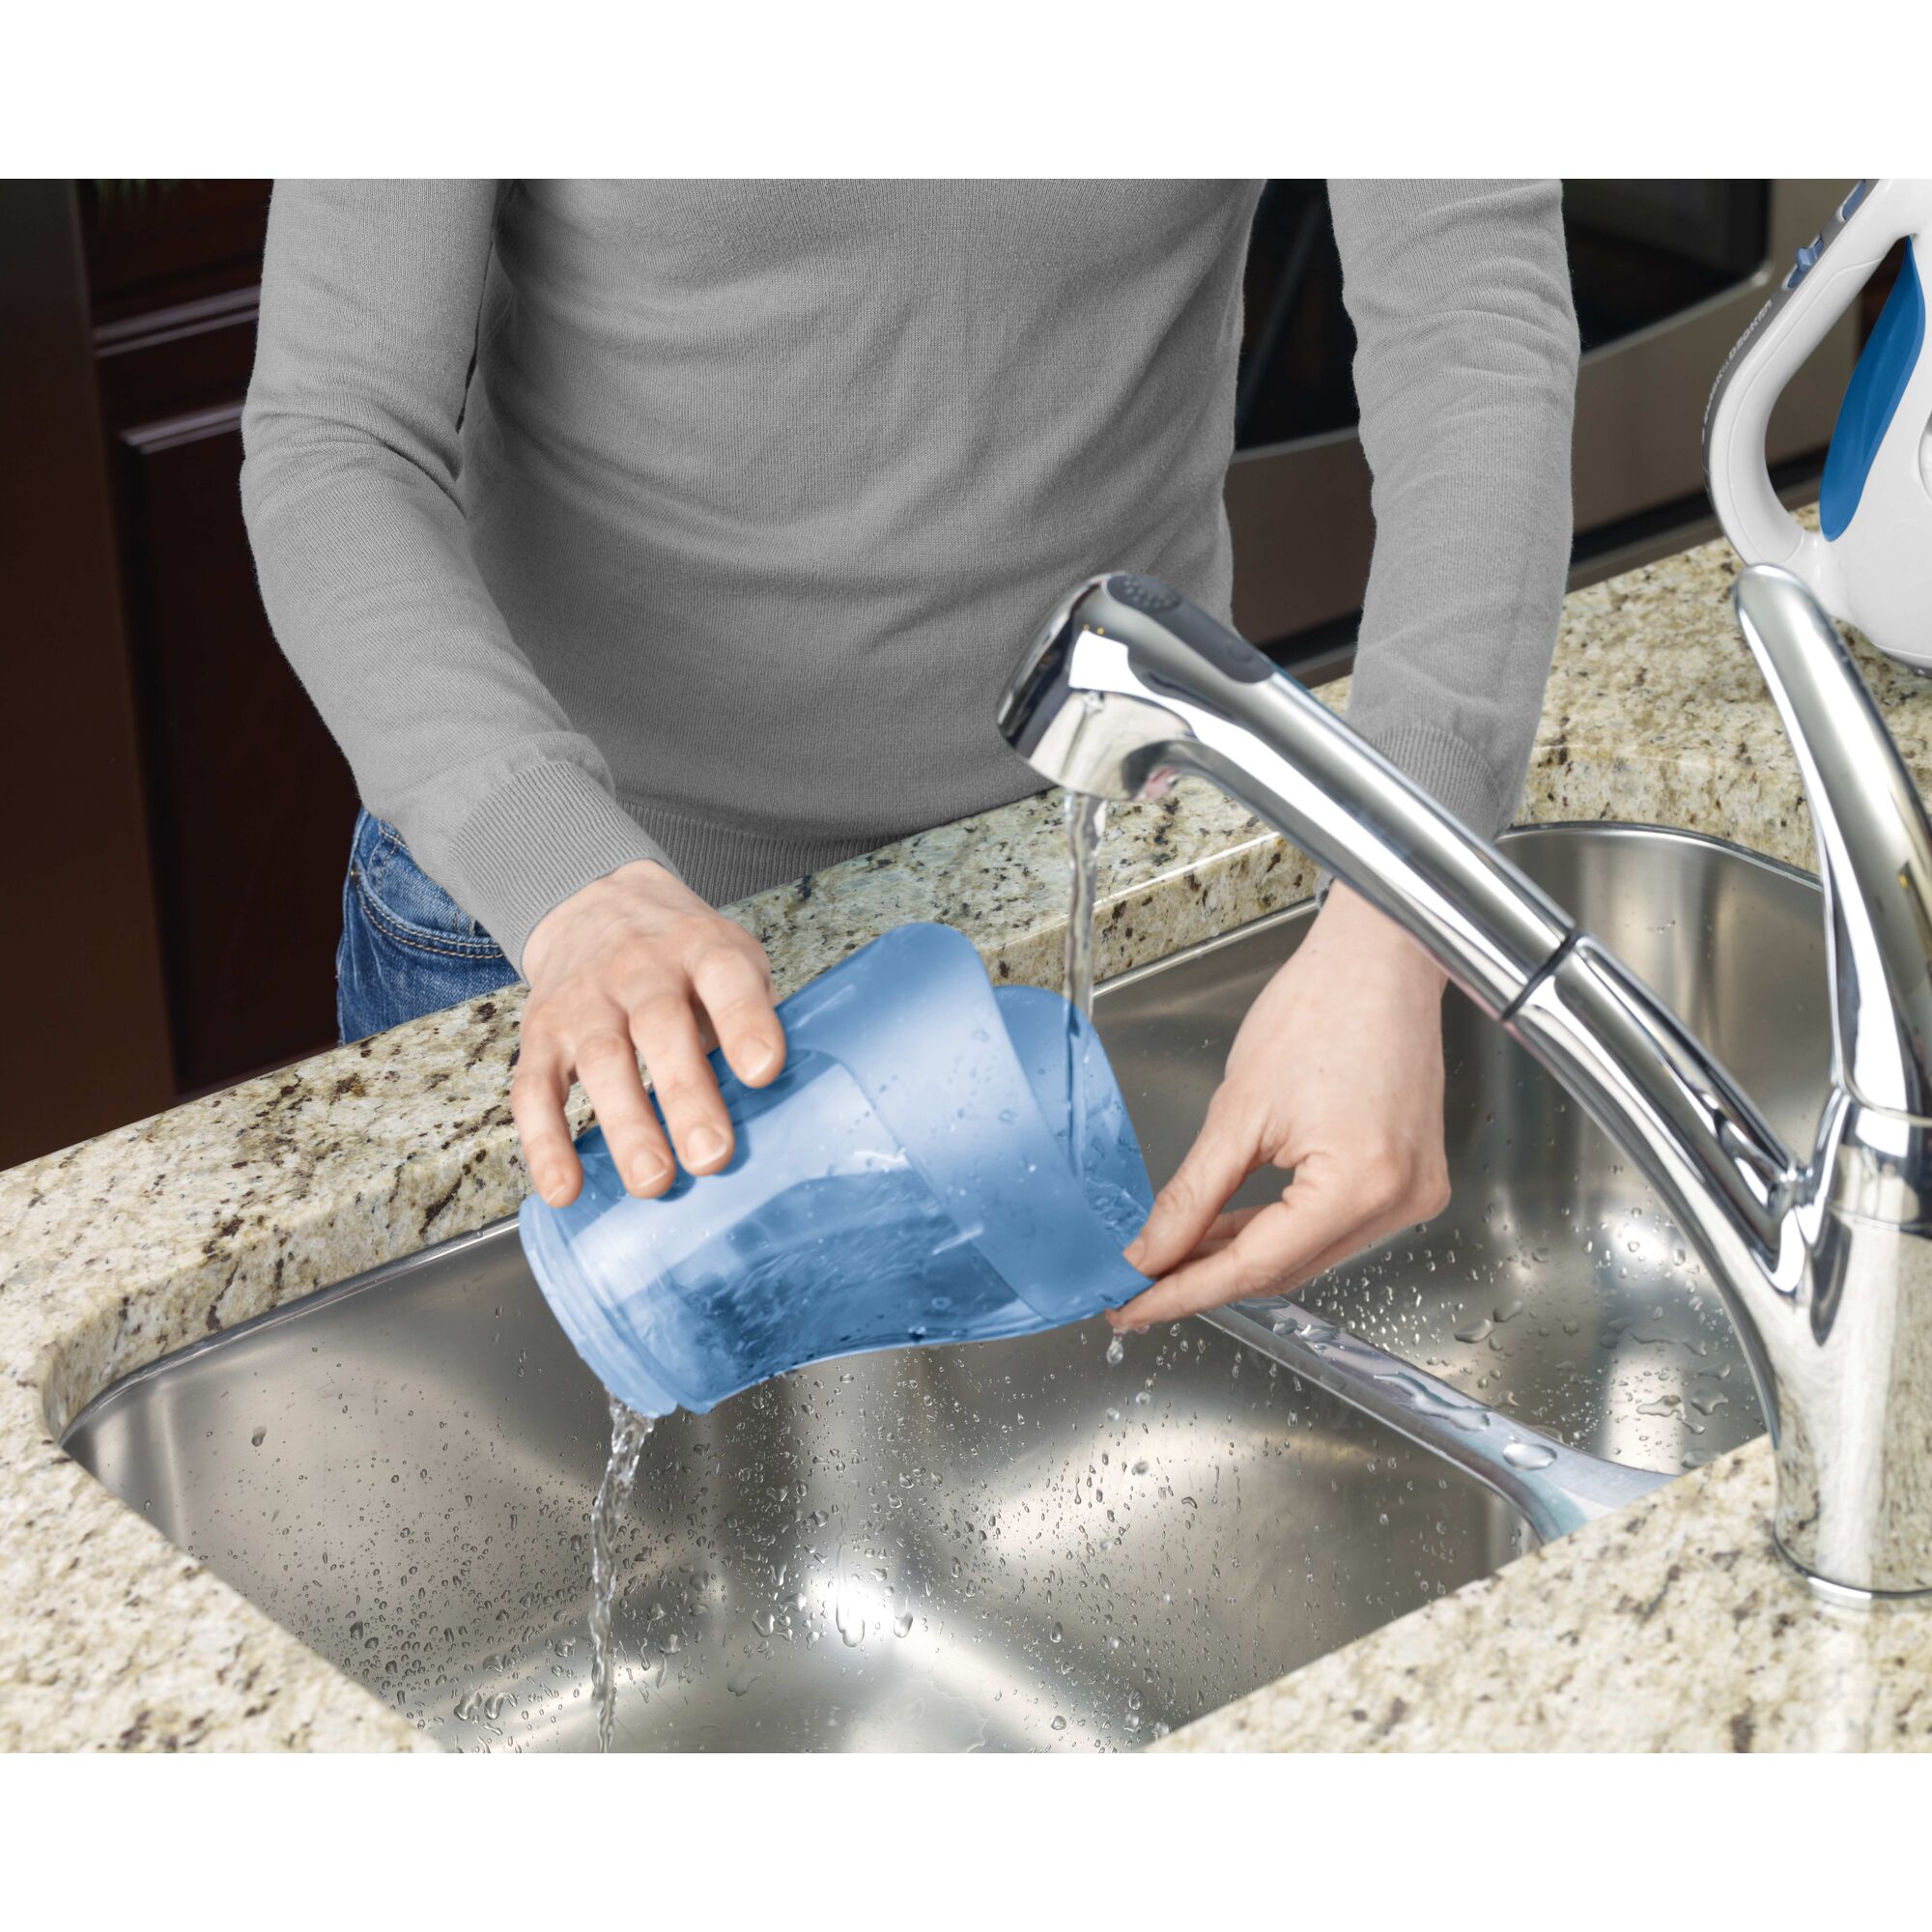 Washable bowl feature of dustbuster magic blue cordless hand vacuum.